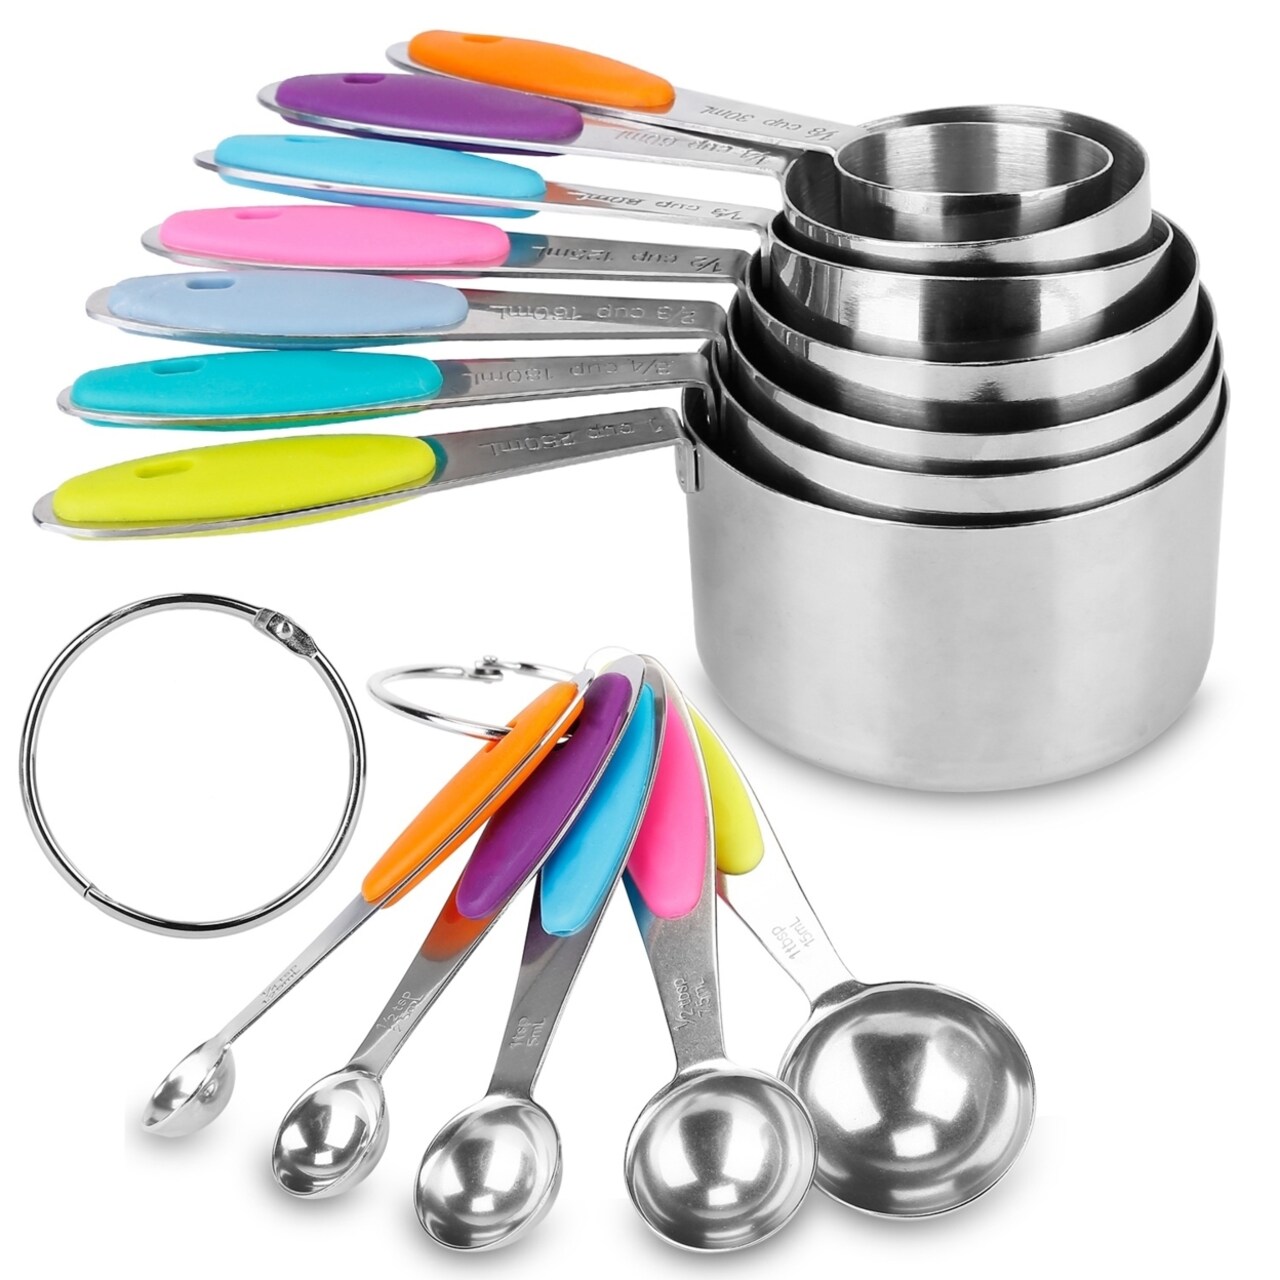 Global Phoenix 12Pcs Measuring Cups Spoons Set Stainless Steel Kitchen  Measurement Tool for Cooking Baking Dry Spices Liquid Ingredients